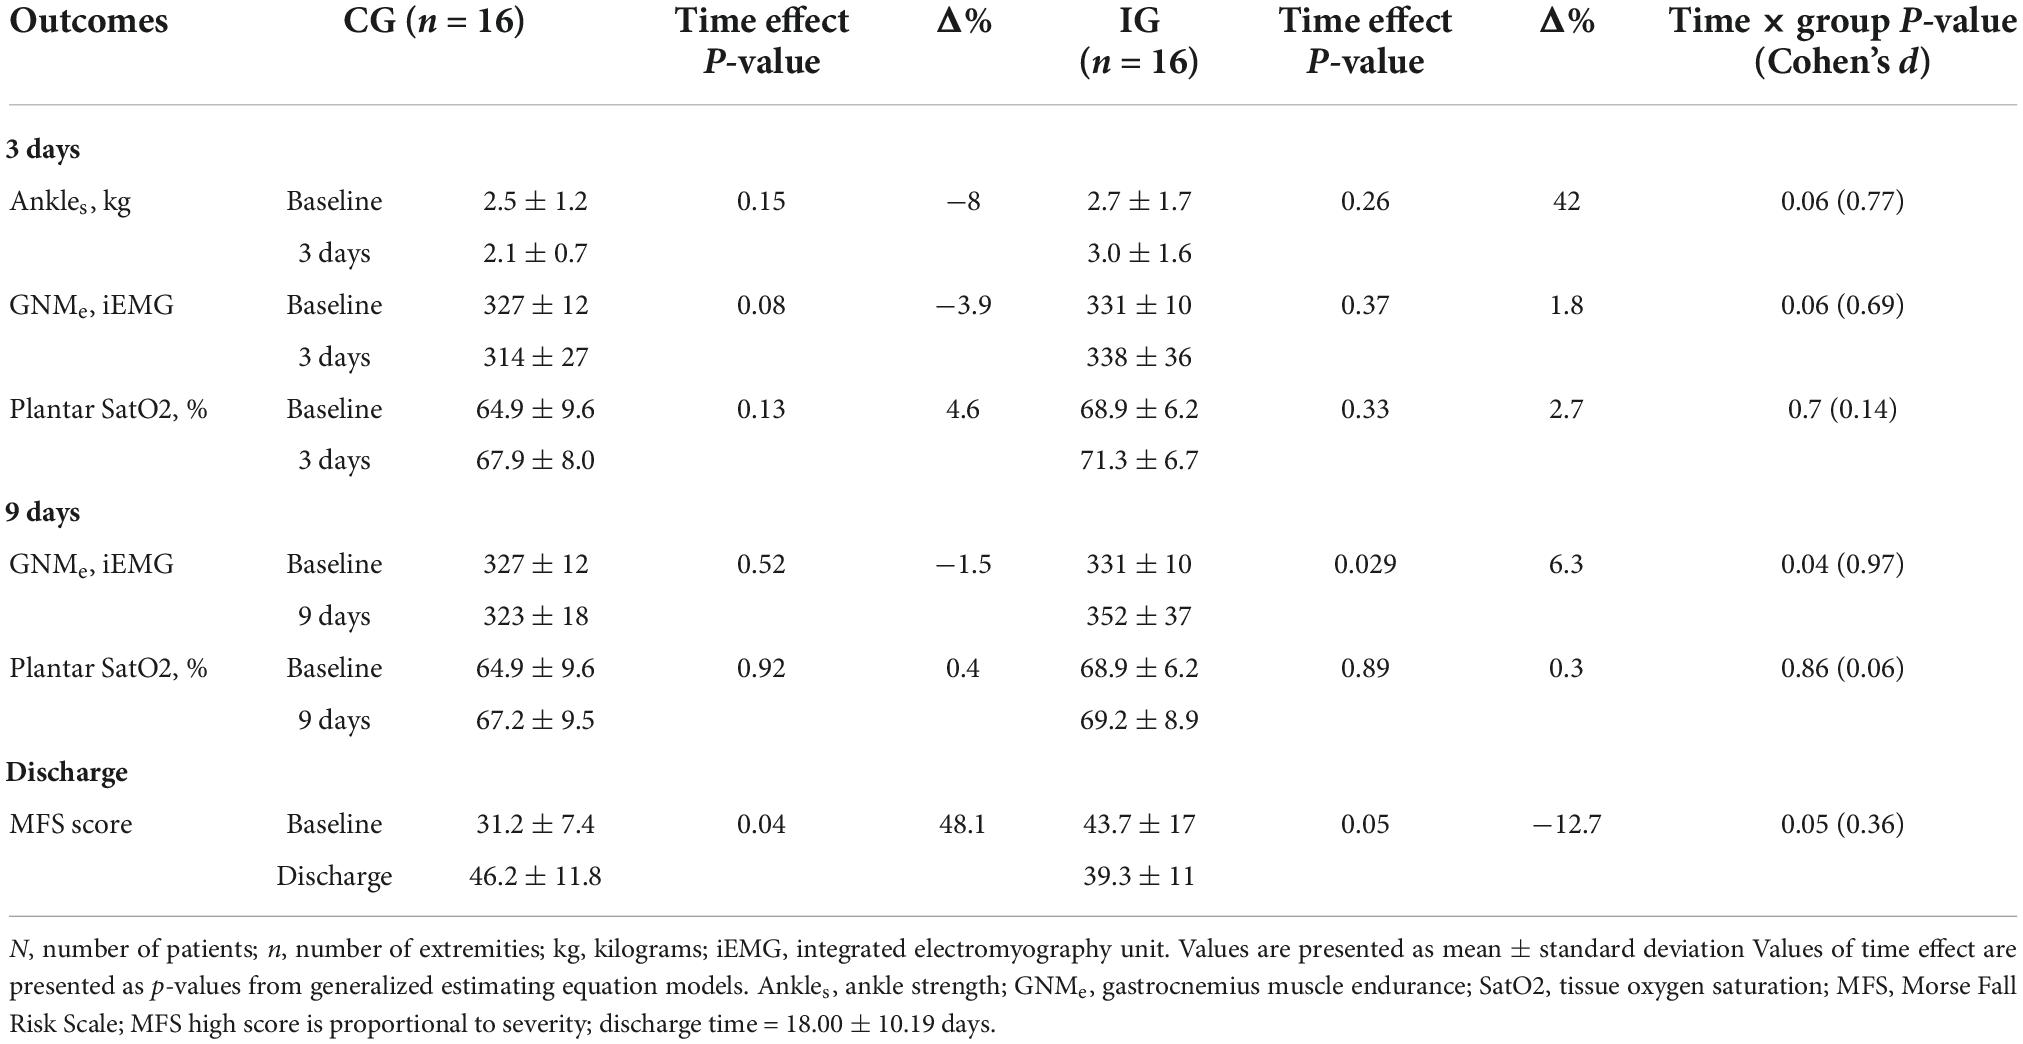 Frontiers  Safety and efficacy of electrical stimulation for  lower-extremity muscle weakness in intensive care unit 2019 Novel  Coronavirus patients: A phase I double-blinded randomized controlled trial